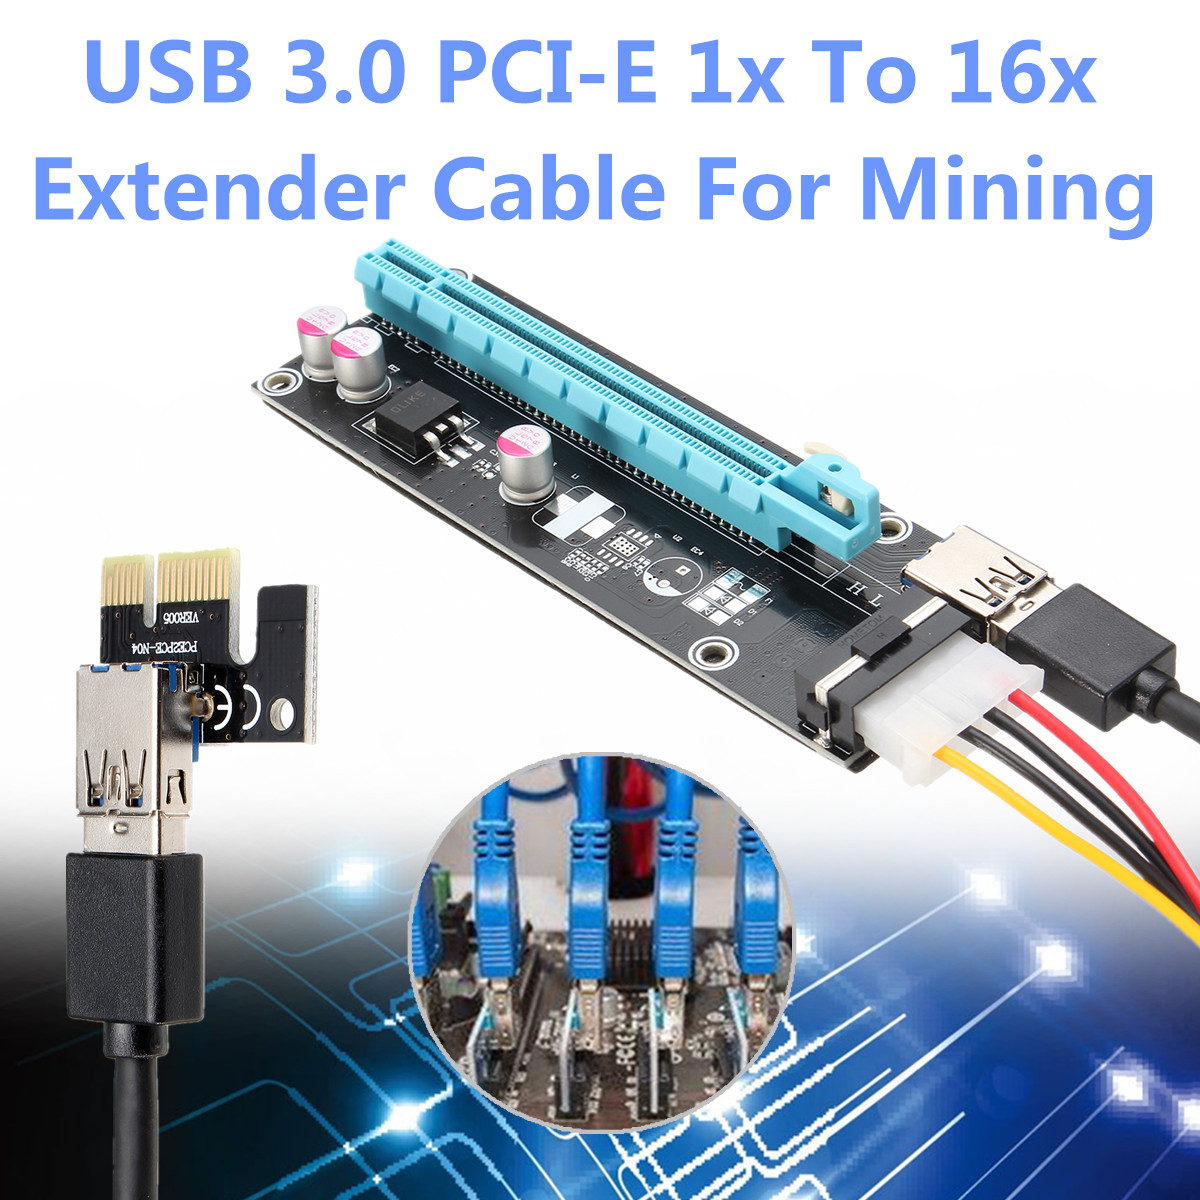 PCIE-Mining-Cable-1X-to-16X-Graphics-Card-Extension-Cable-PCI-E-Anti-burn-Design-USB30-External-Grap-1250533-1